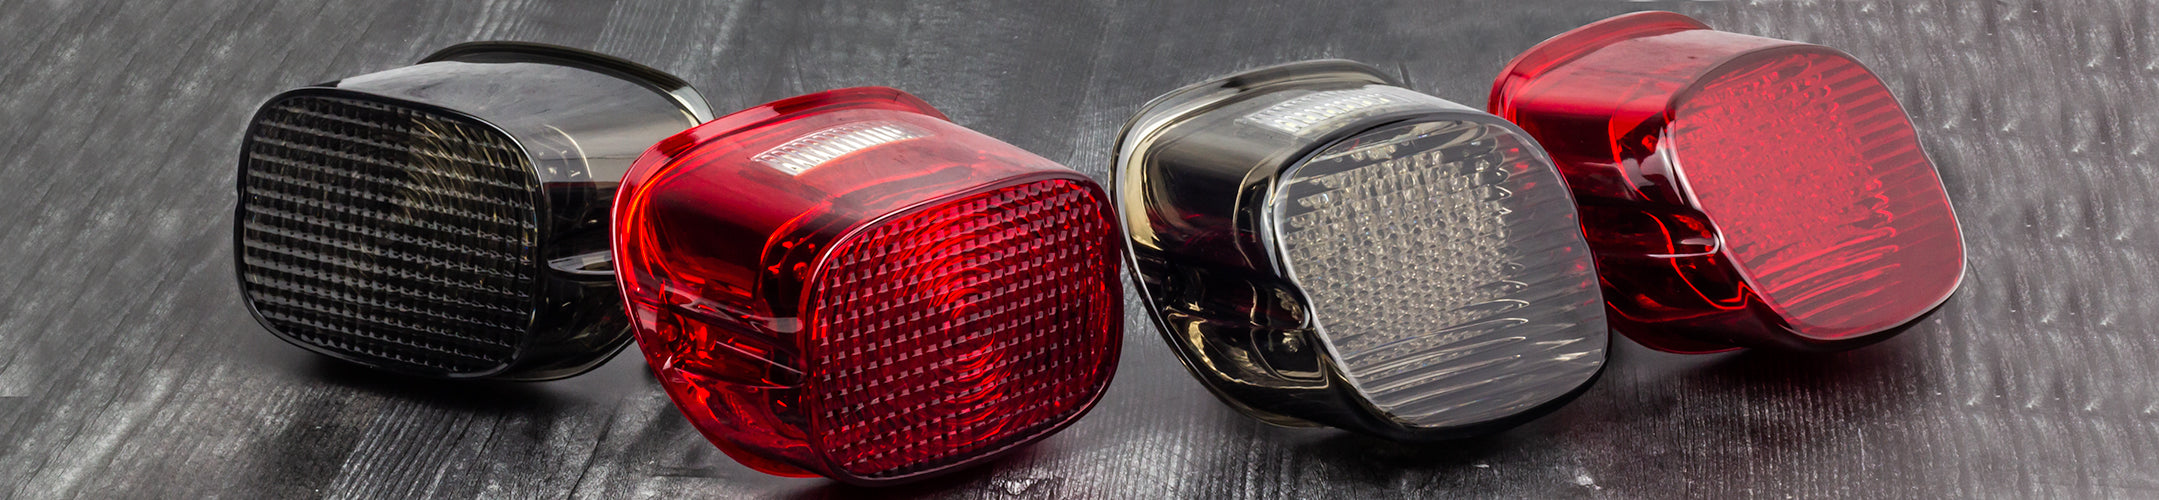 Motorcycle LED Strobing Tail Lights